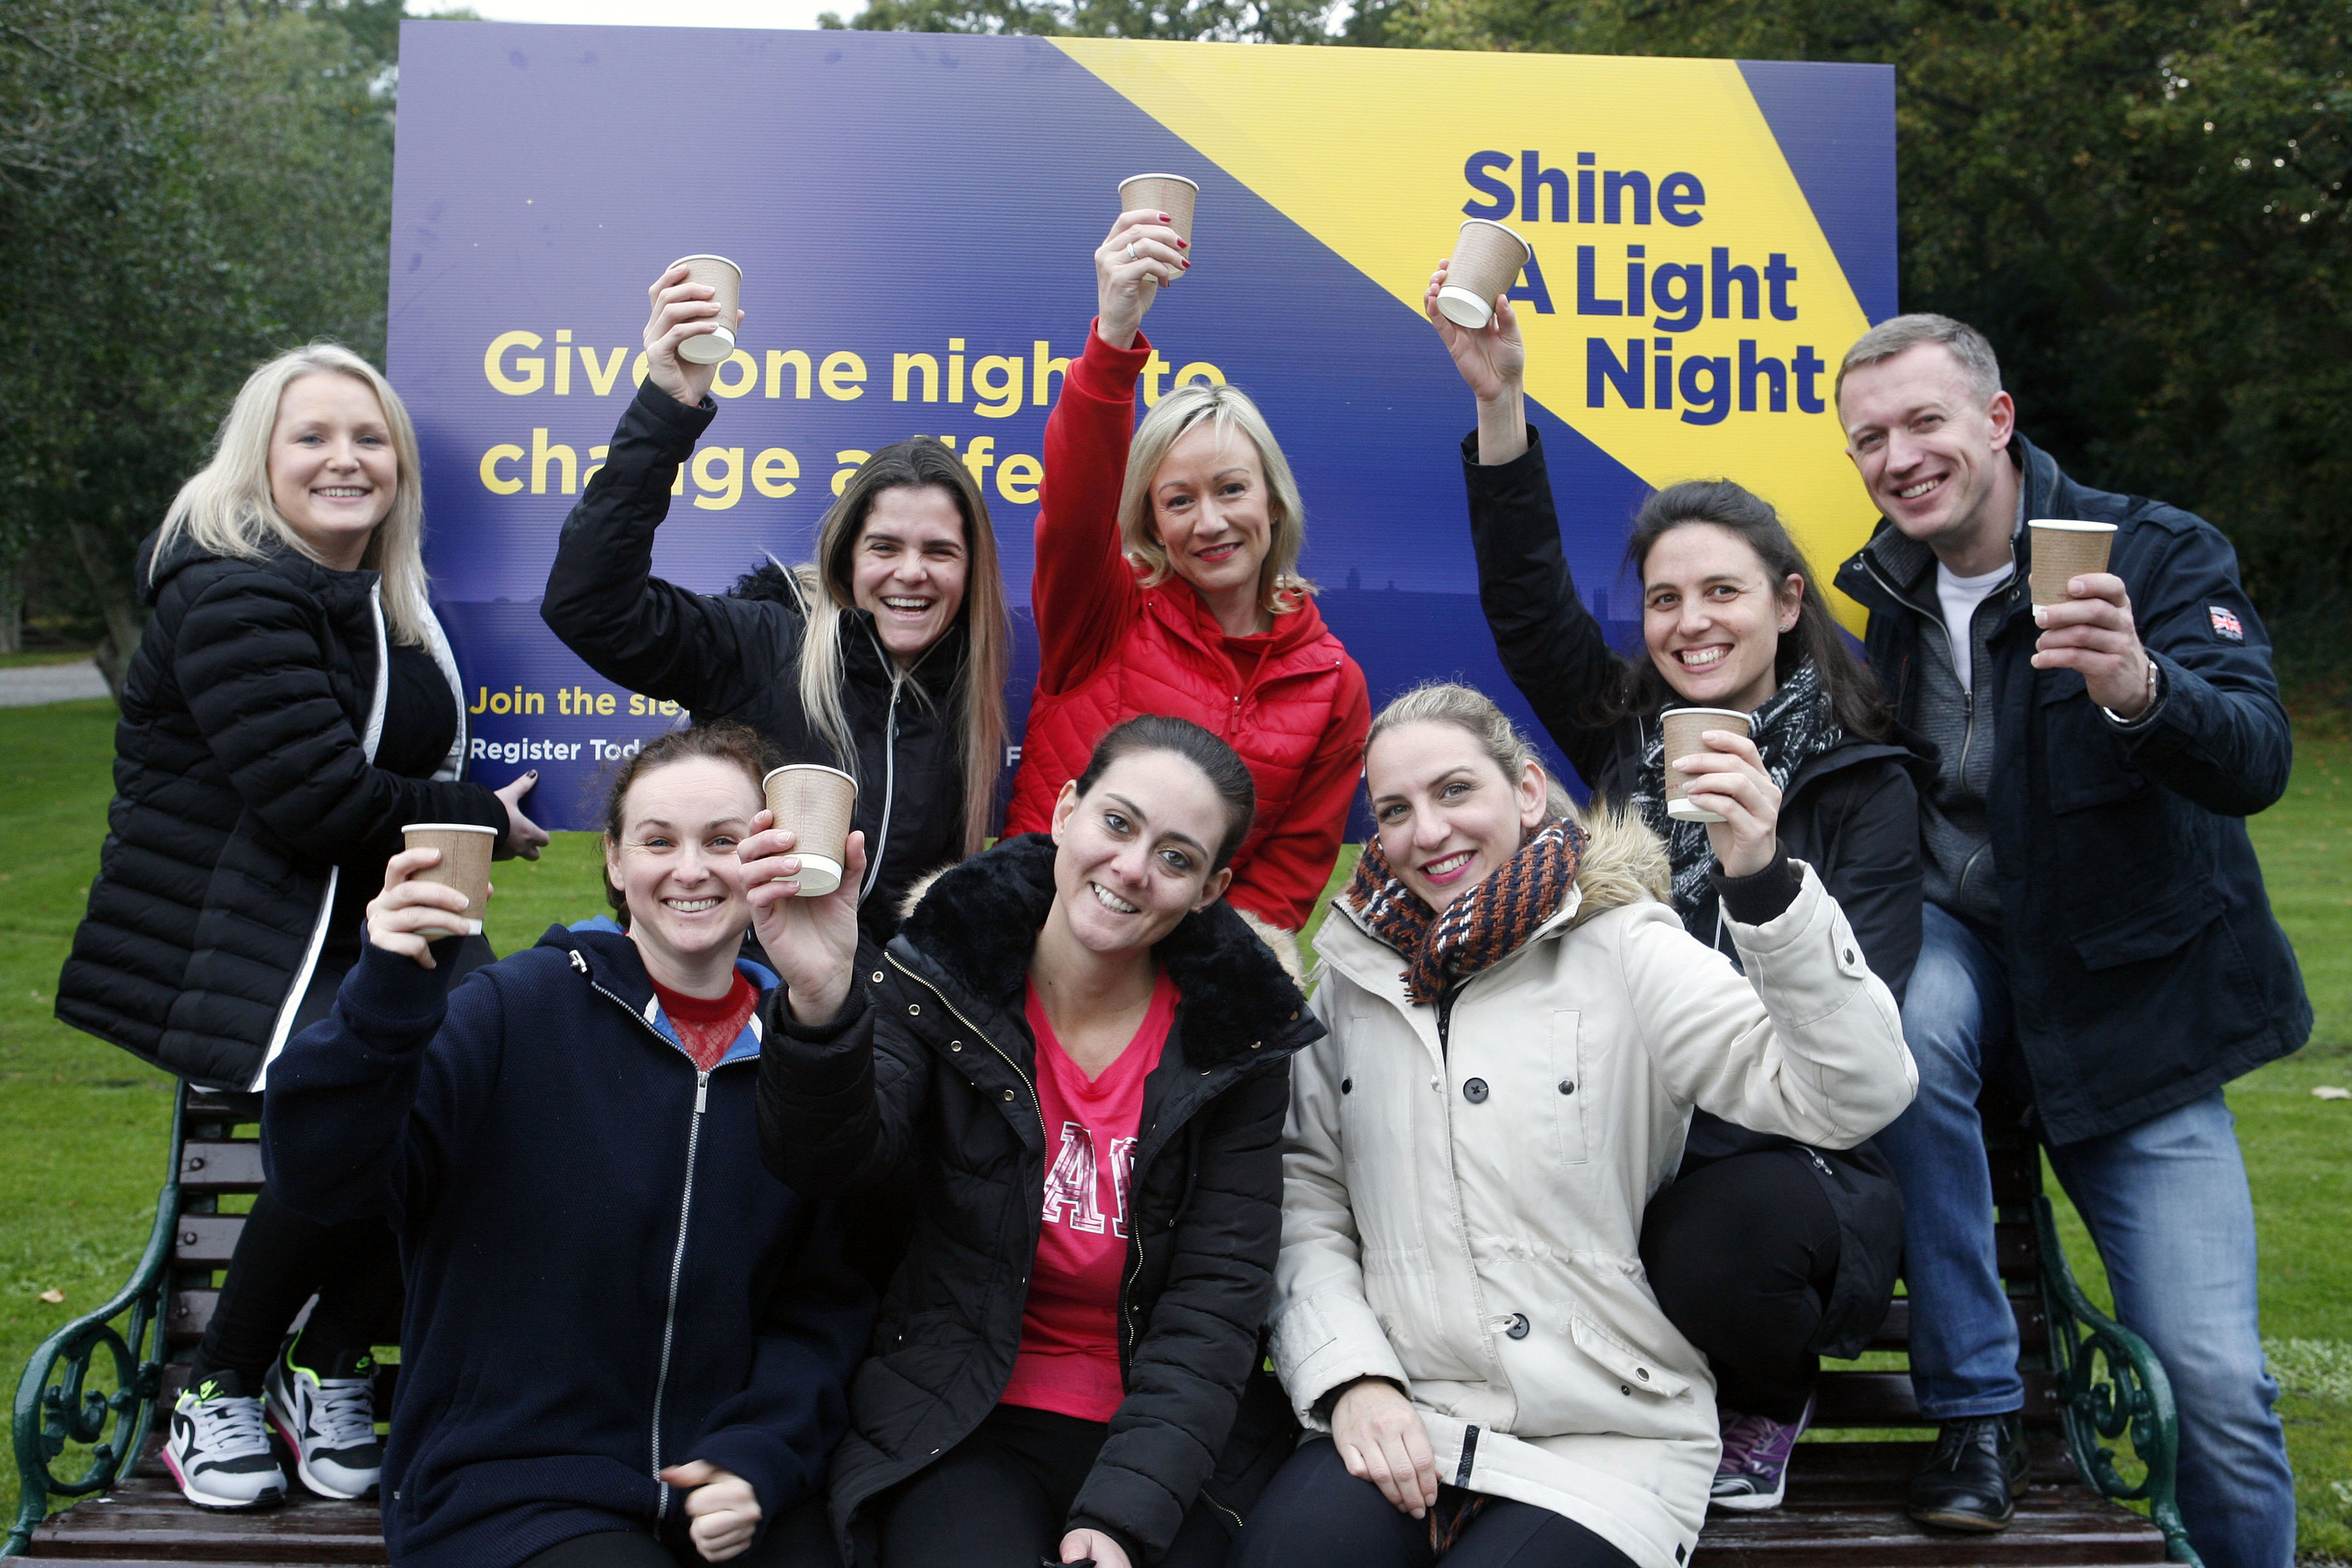 Sodexo collegaues at the 2019 Shine a Light Night